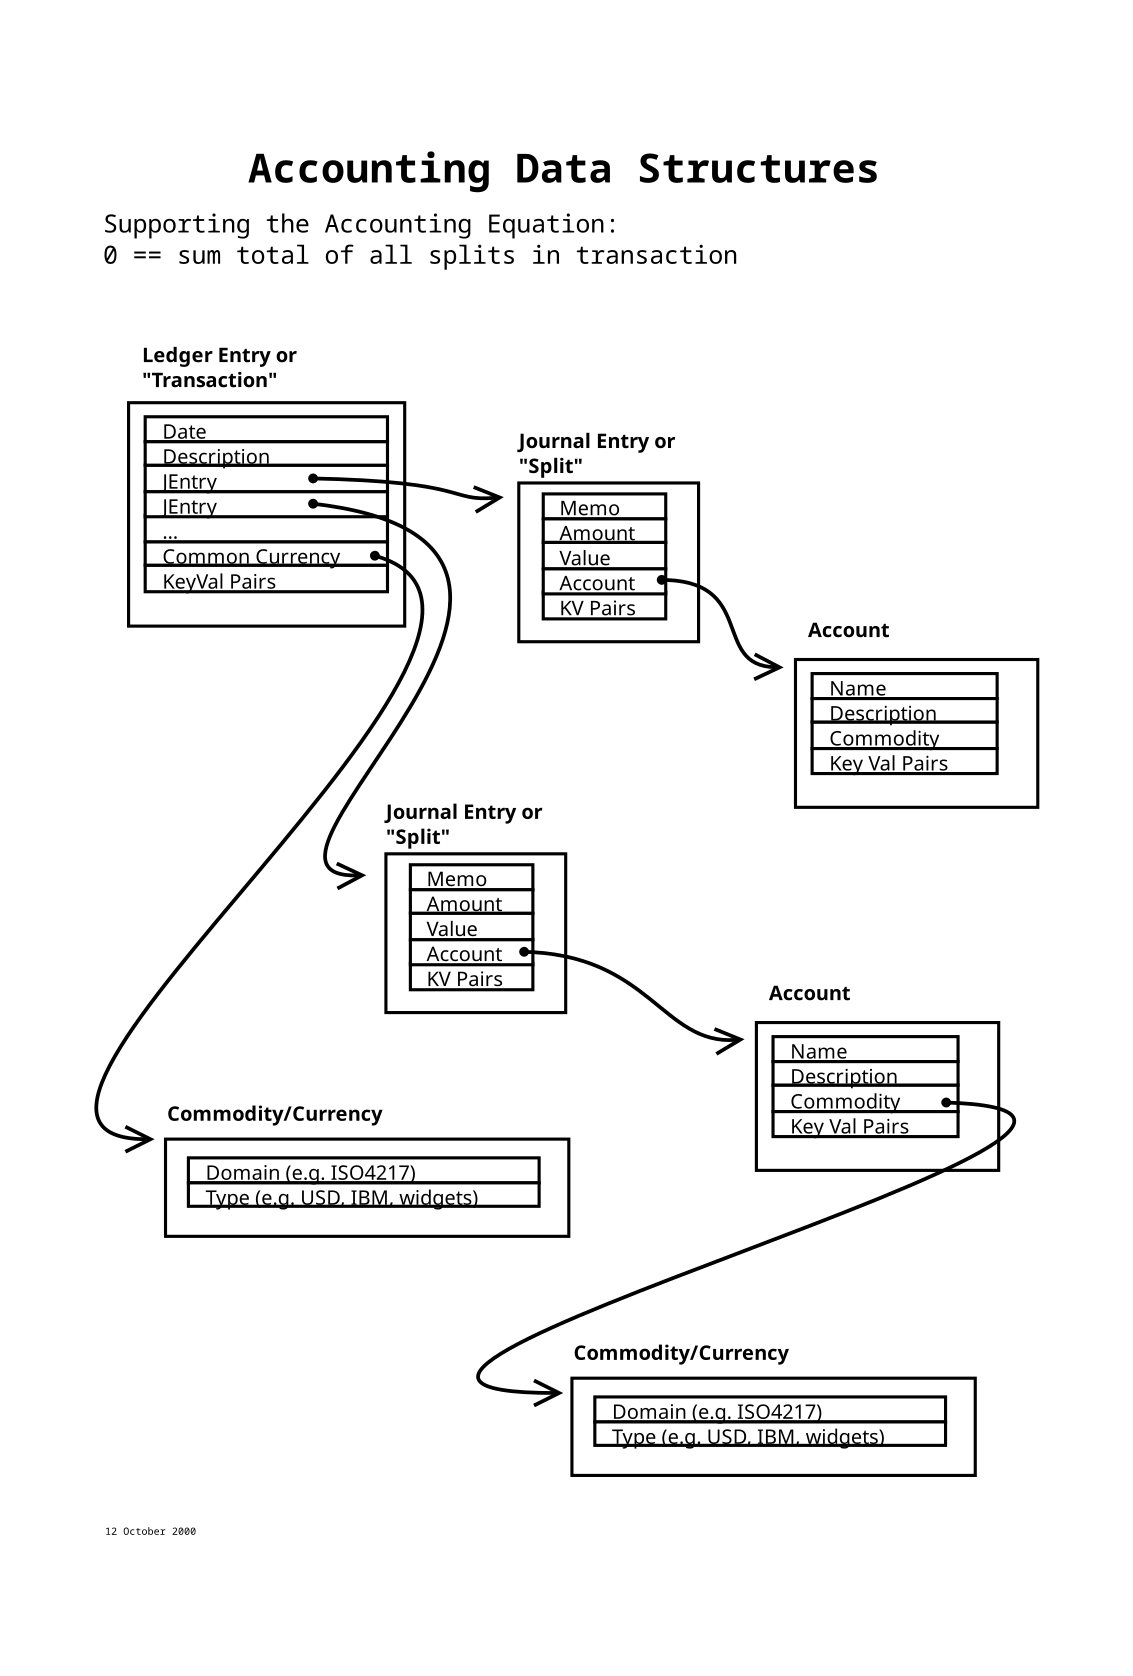 Accounting-data-structures-alt.png